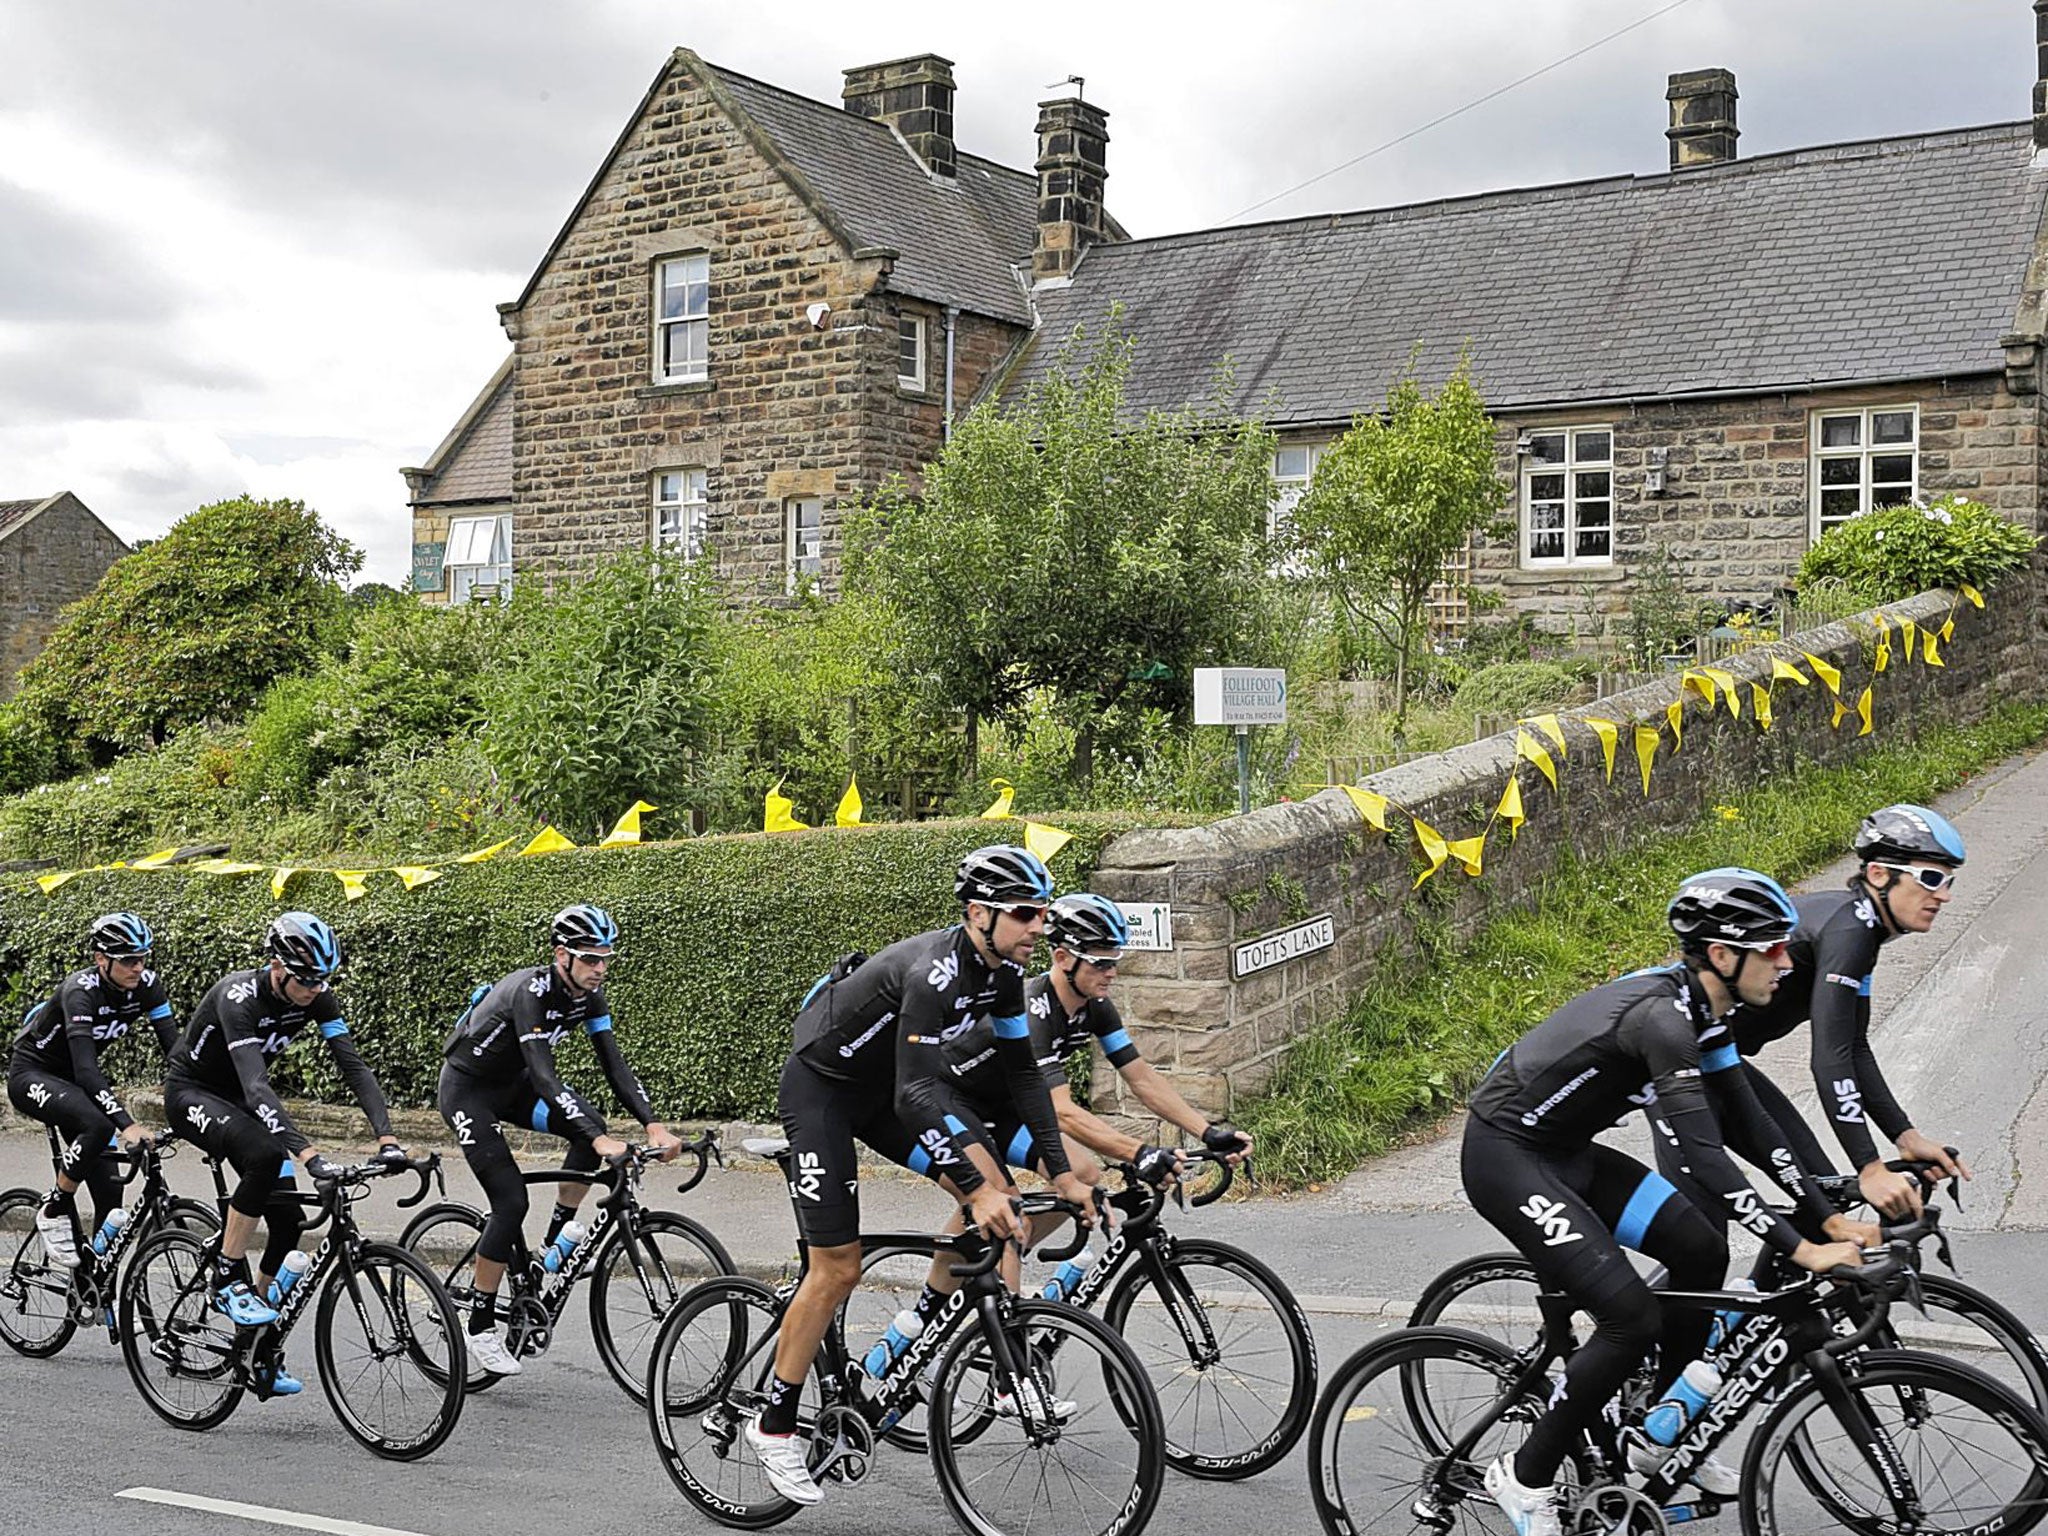 Chris Froome and his Sky team take to the roads of Yorkshire yesterday for a practice run